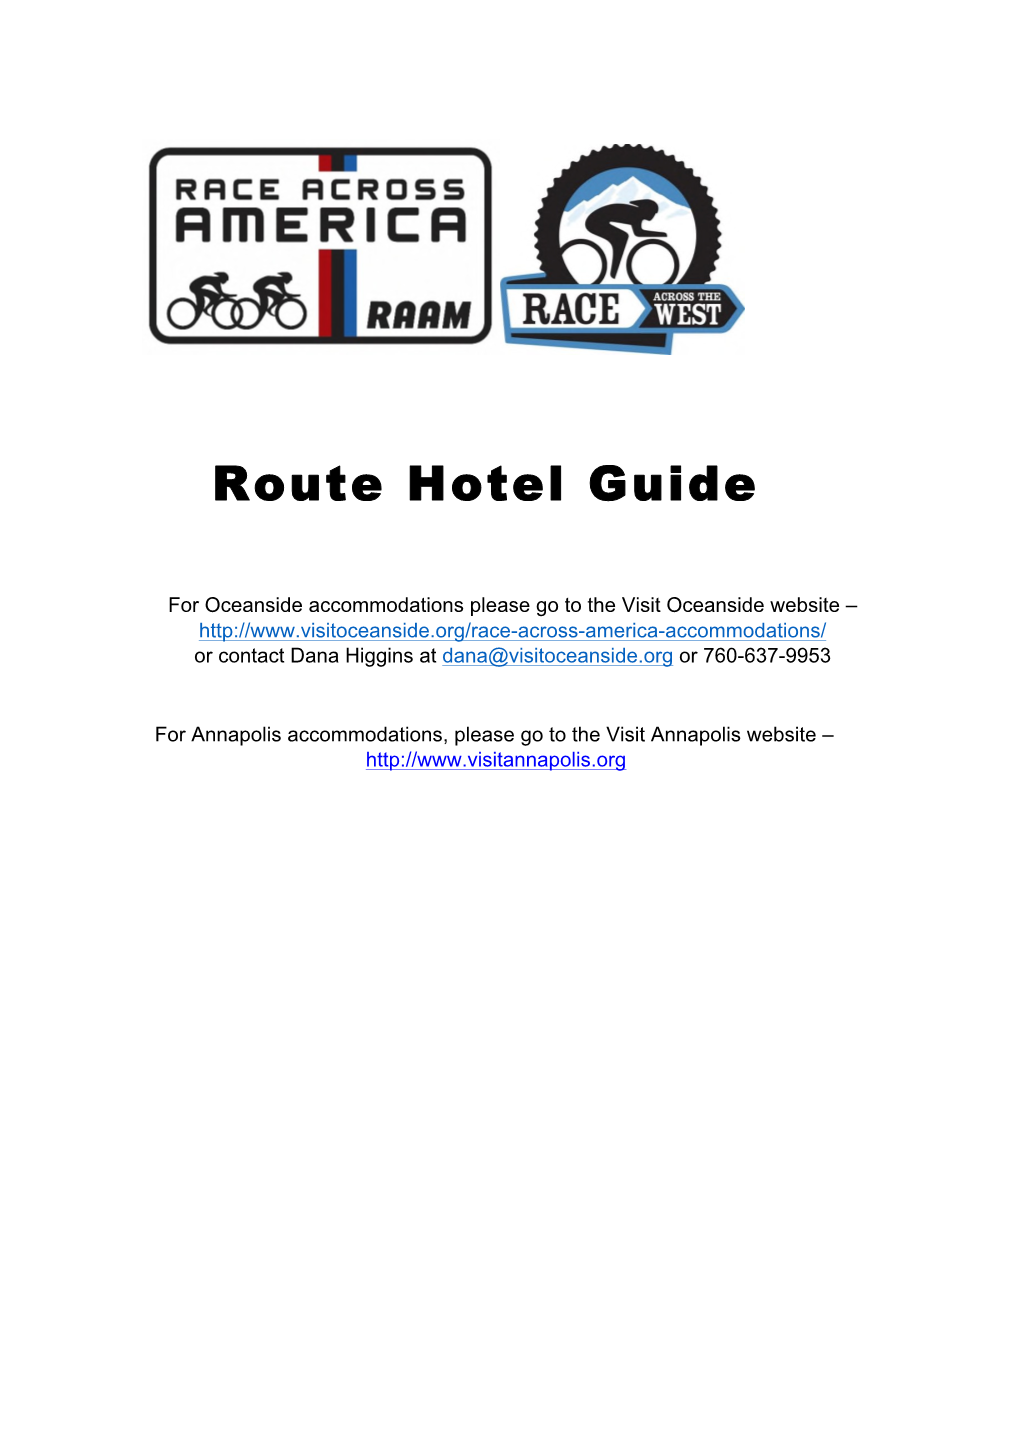 Hotel Route Guide